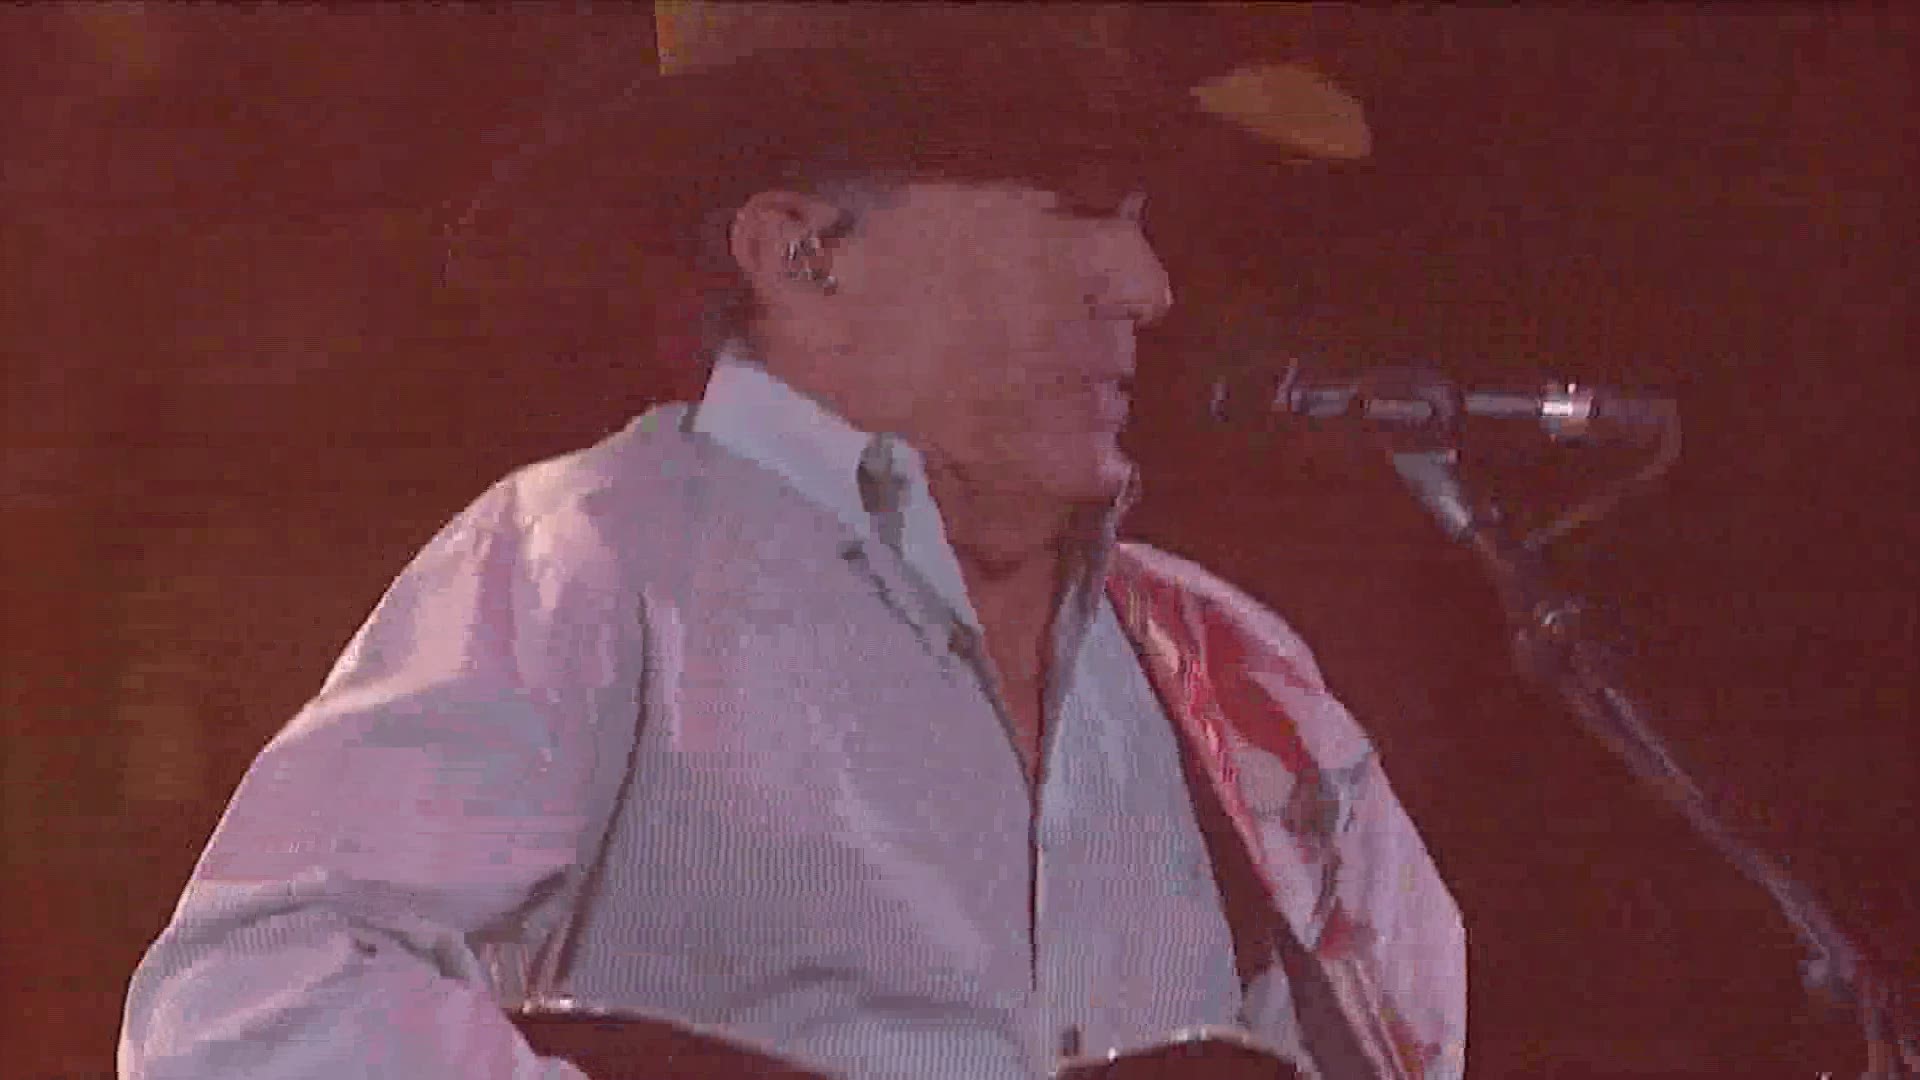 The Houston Livestock Show & Rodeo continues to plan for its big post-COVID return, including a special concert-only performance featuring George Strait.